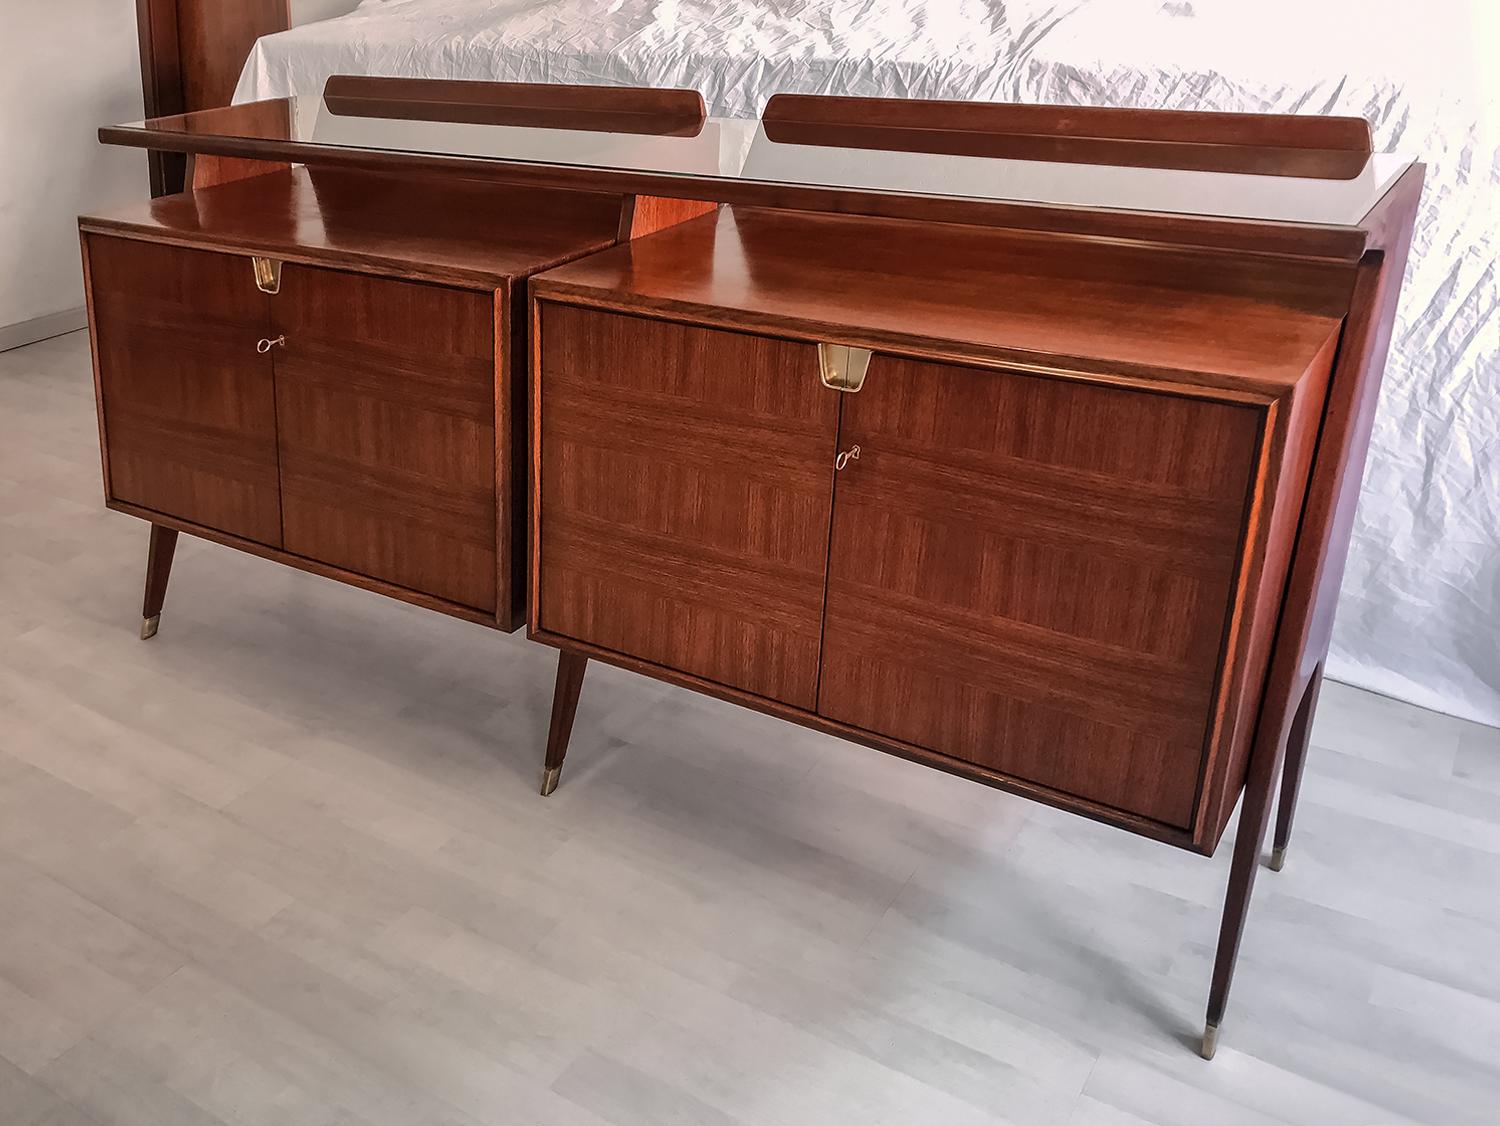 This stunning Italian sideboard has been manufactured by La Permanente Mobili Cantù and is a masterfully crafted teak wood showpiece of the 1950s-1960s, designed in the style of Ico Parisi.
The structure has a top transparent glass and is supported